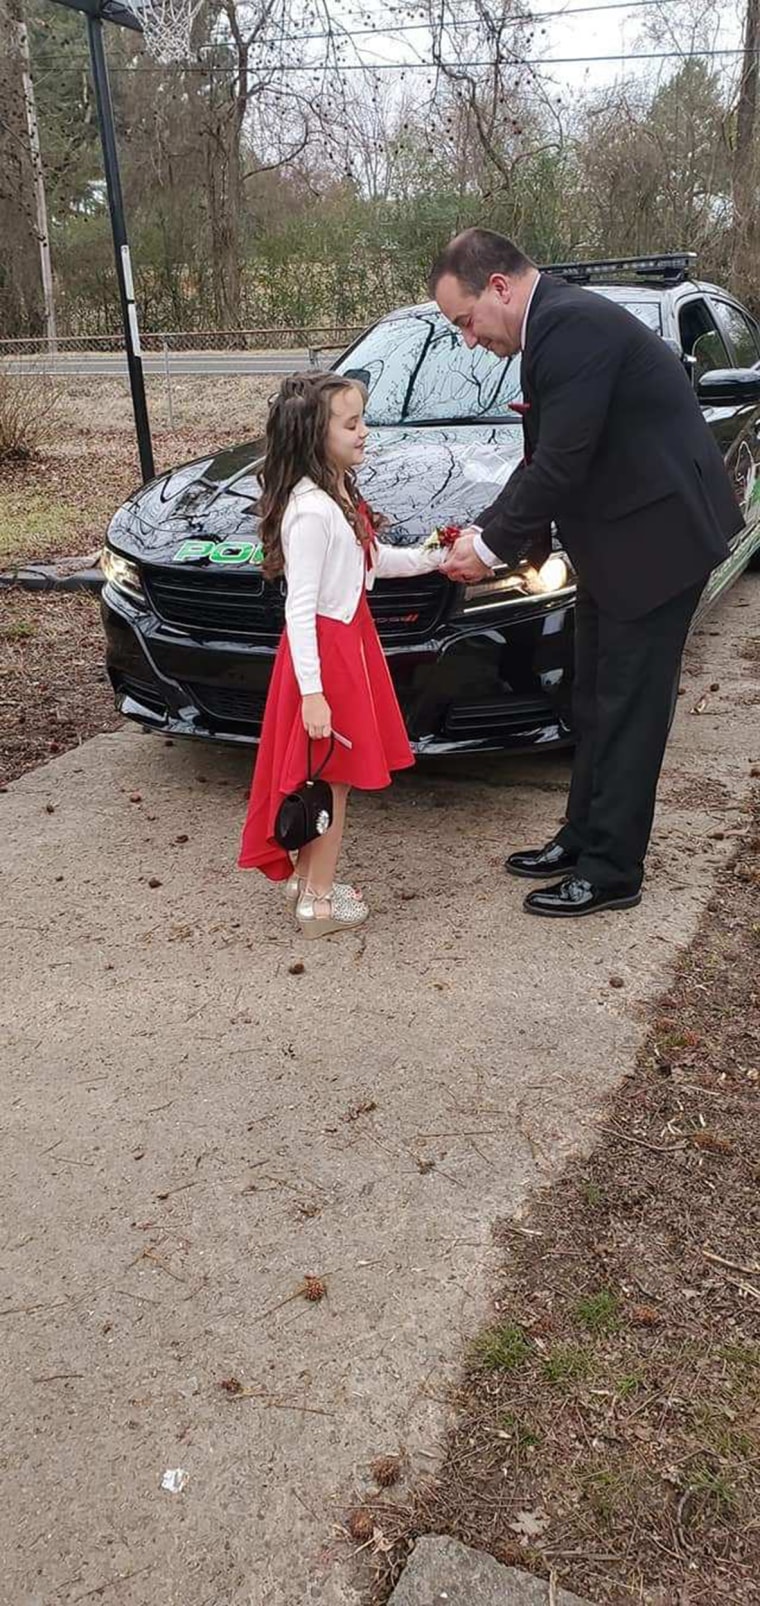 School resource officer Nicol "Nick" Harvey took Avey Cox to the father-daughter dance after her father passed away. 